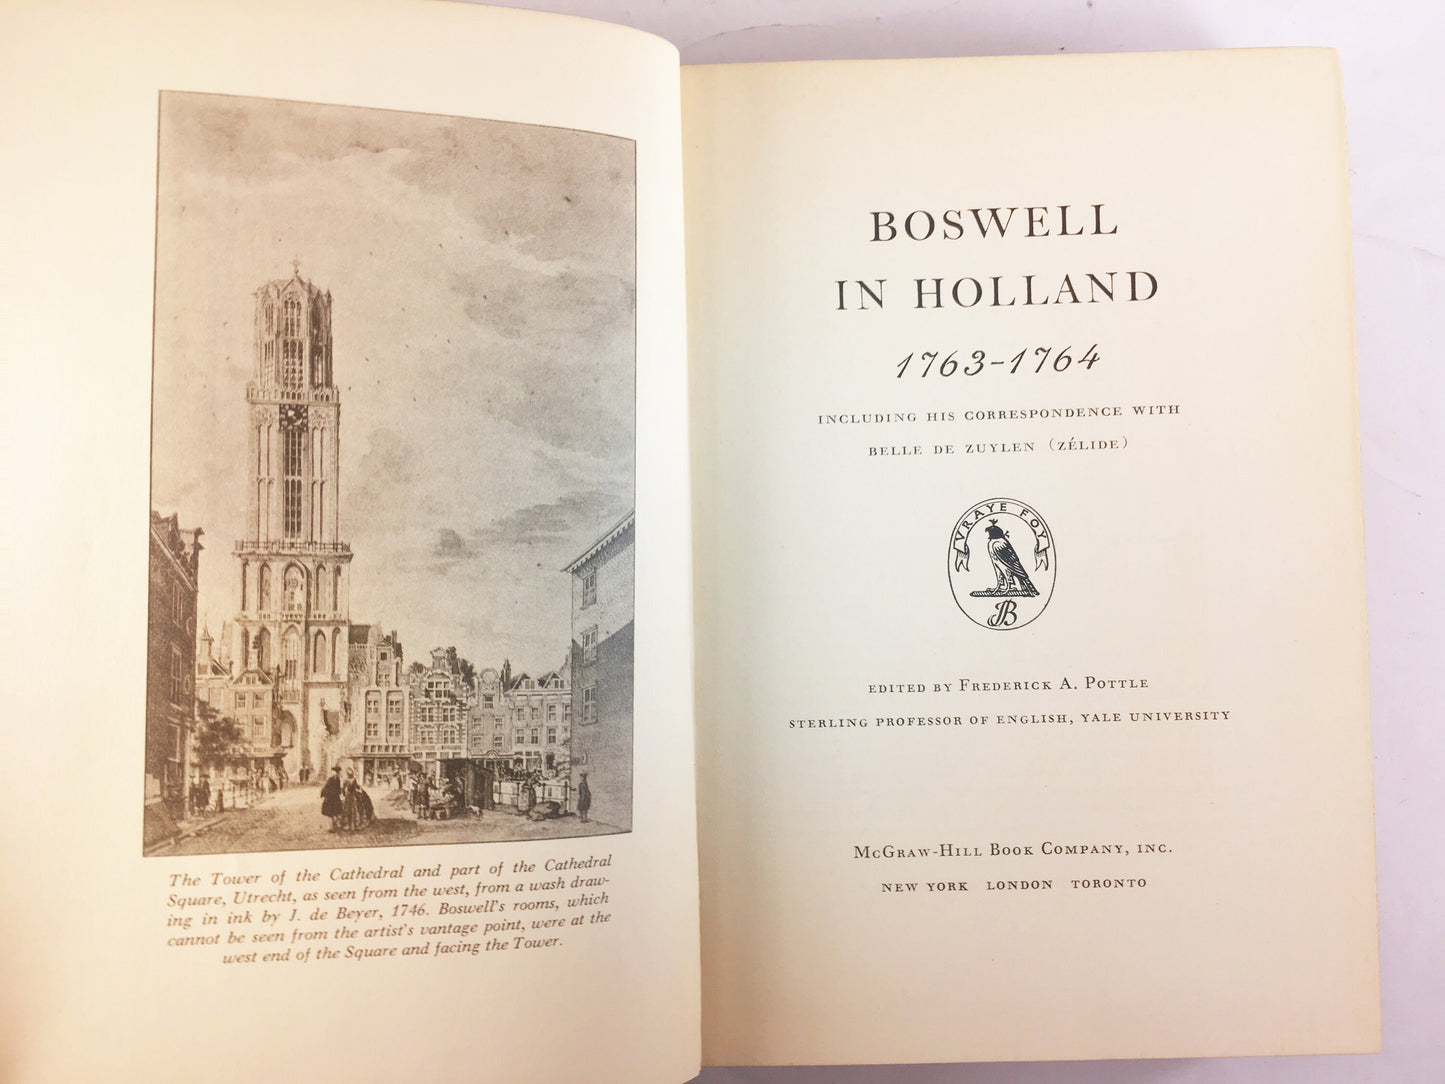 Boswell in Holland-1763-1764, Including the Correspondence With Belle De Zuylen. FIRST EDITION vintage book. Yale Edition circa 1952